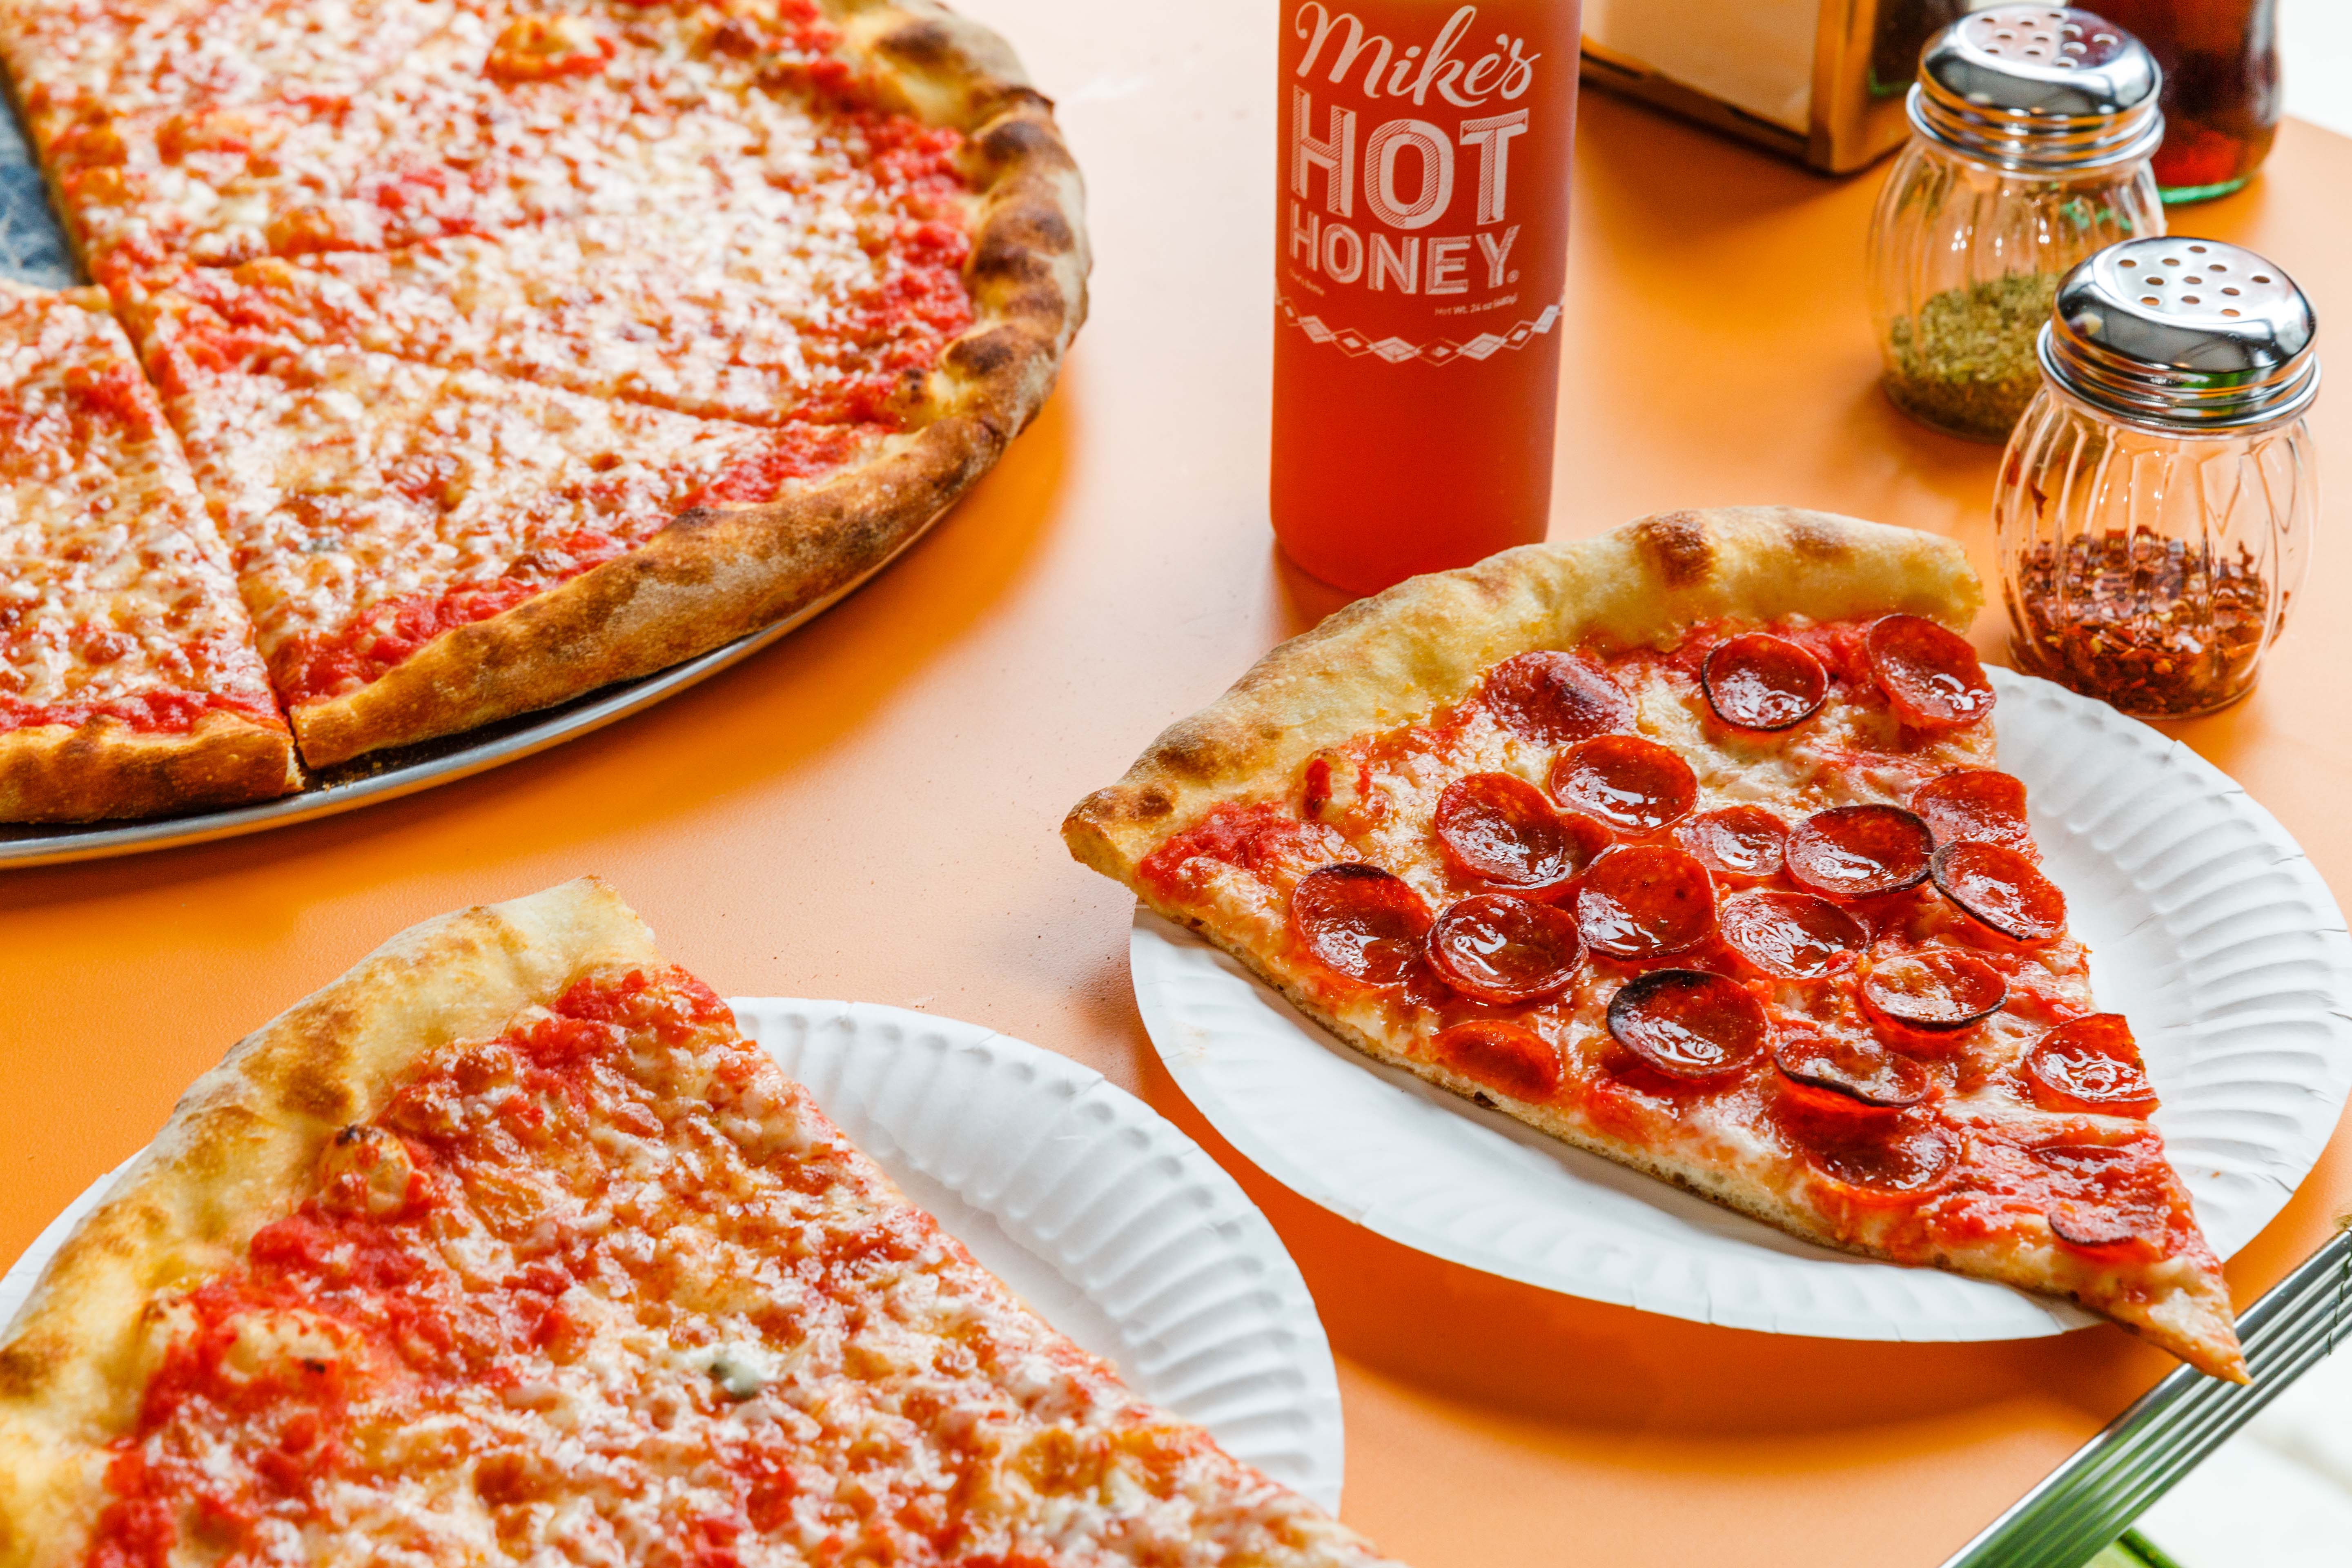 Pepperoni and cheese slices sit on an orange countertop at Paulie Gee’s slice shop, adjacent hot honey sauce and chile flakes